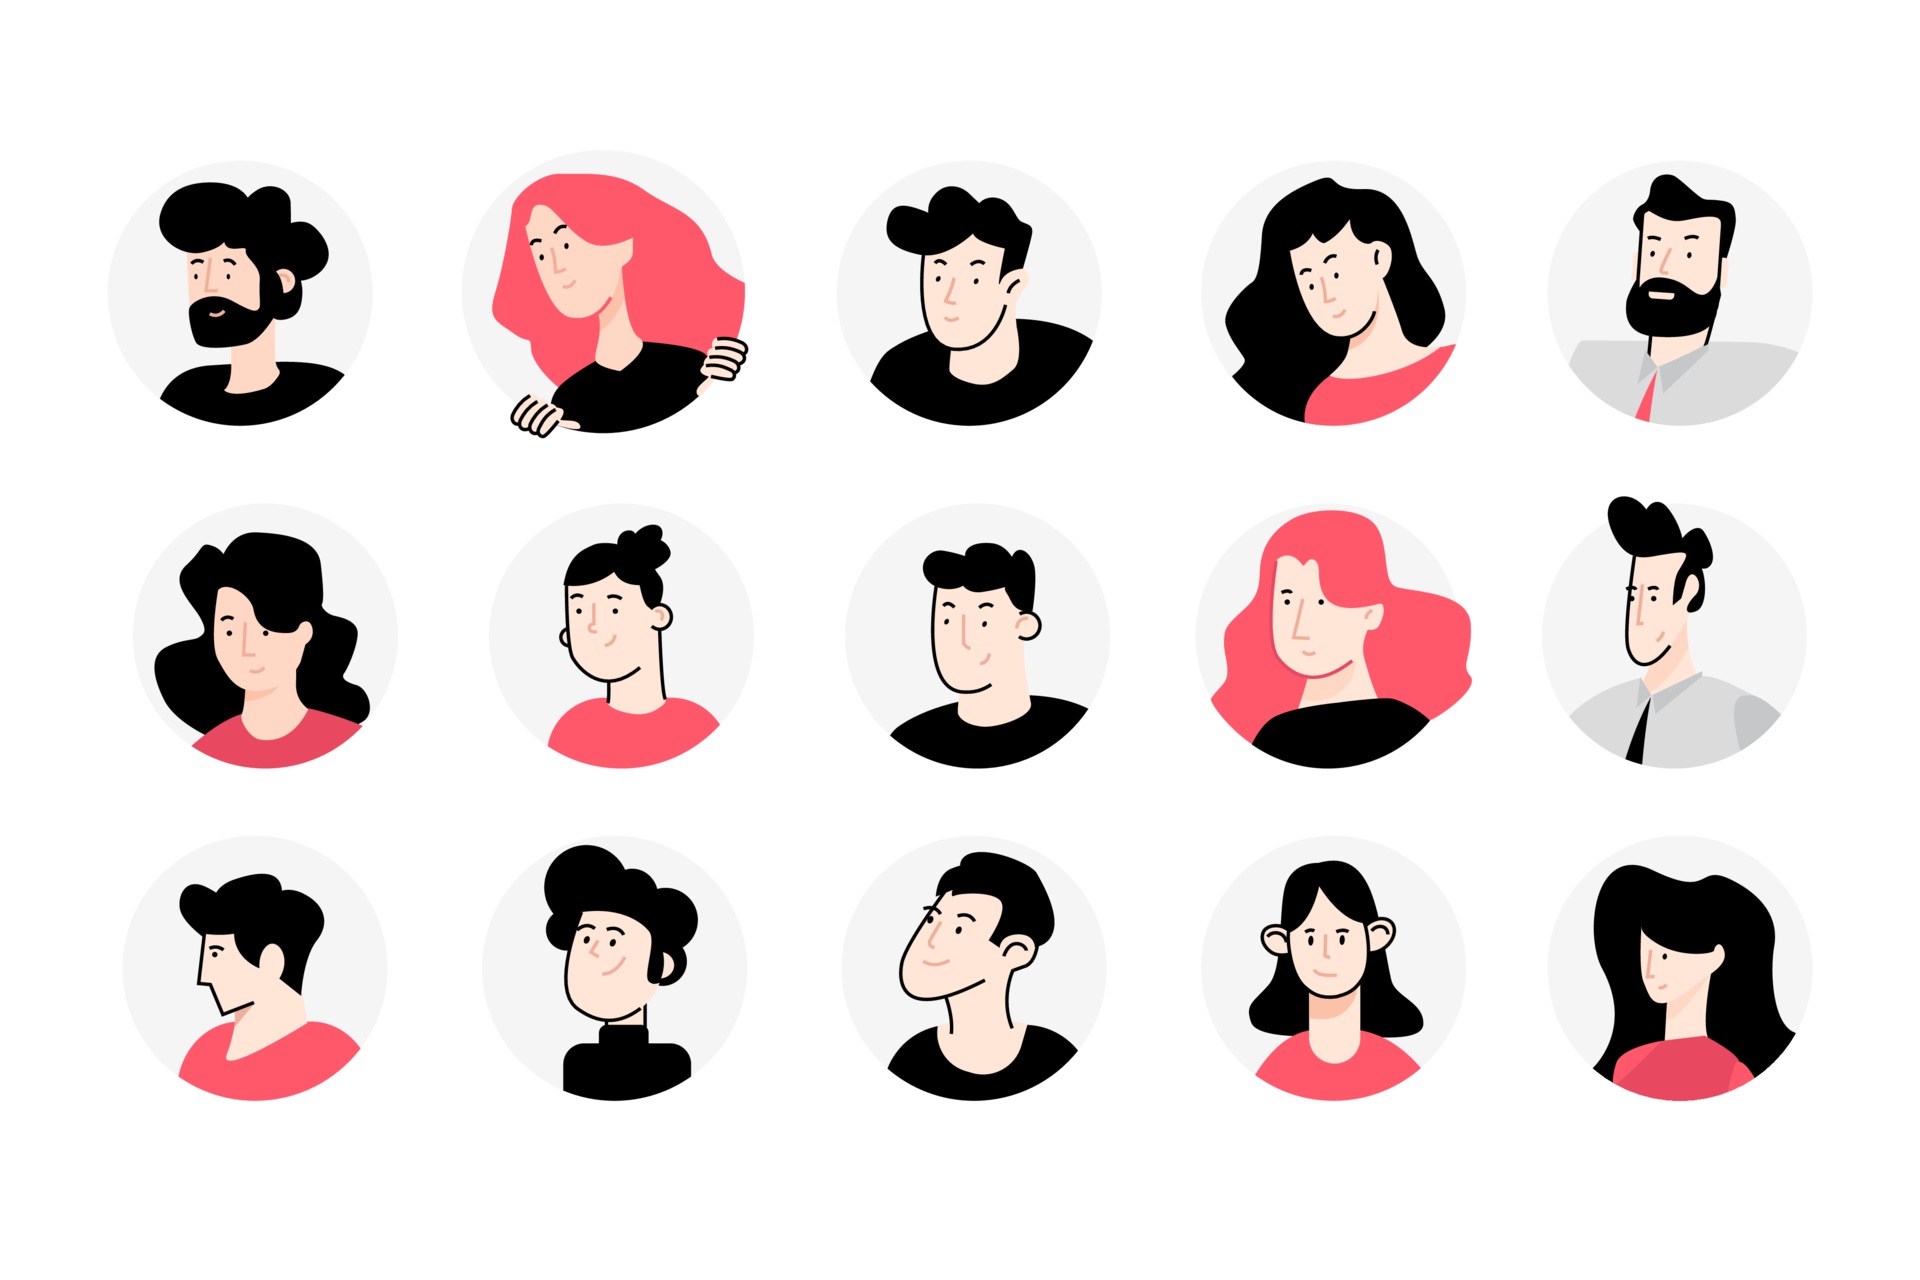 Flat Avatar Vector Art Icons and Graphics for Free Download